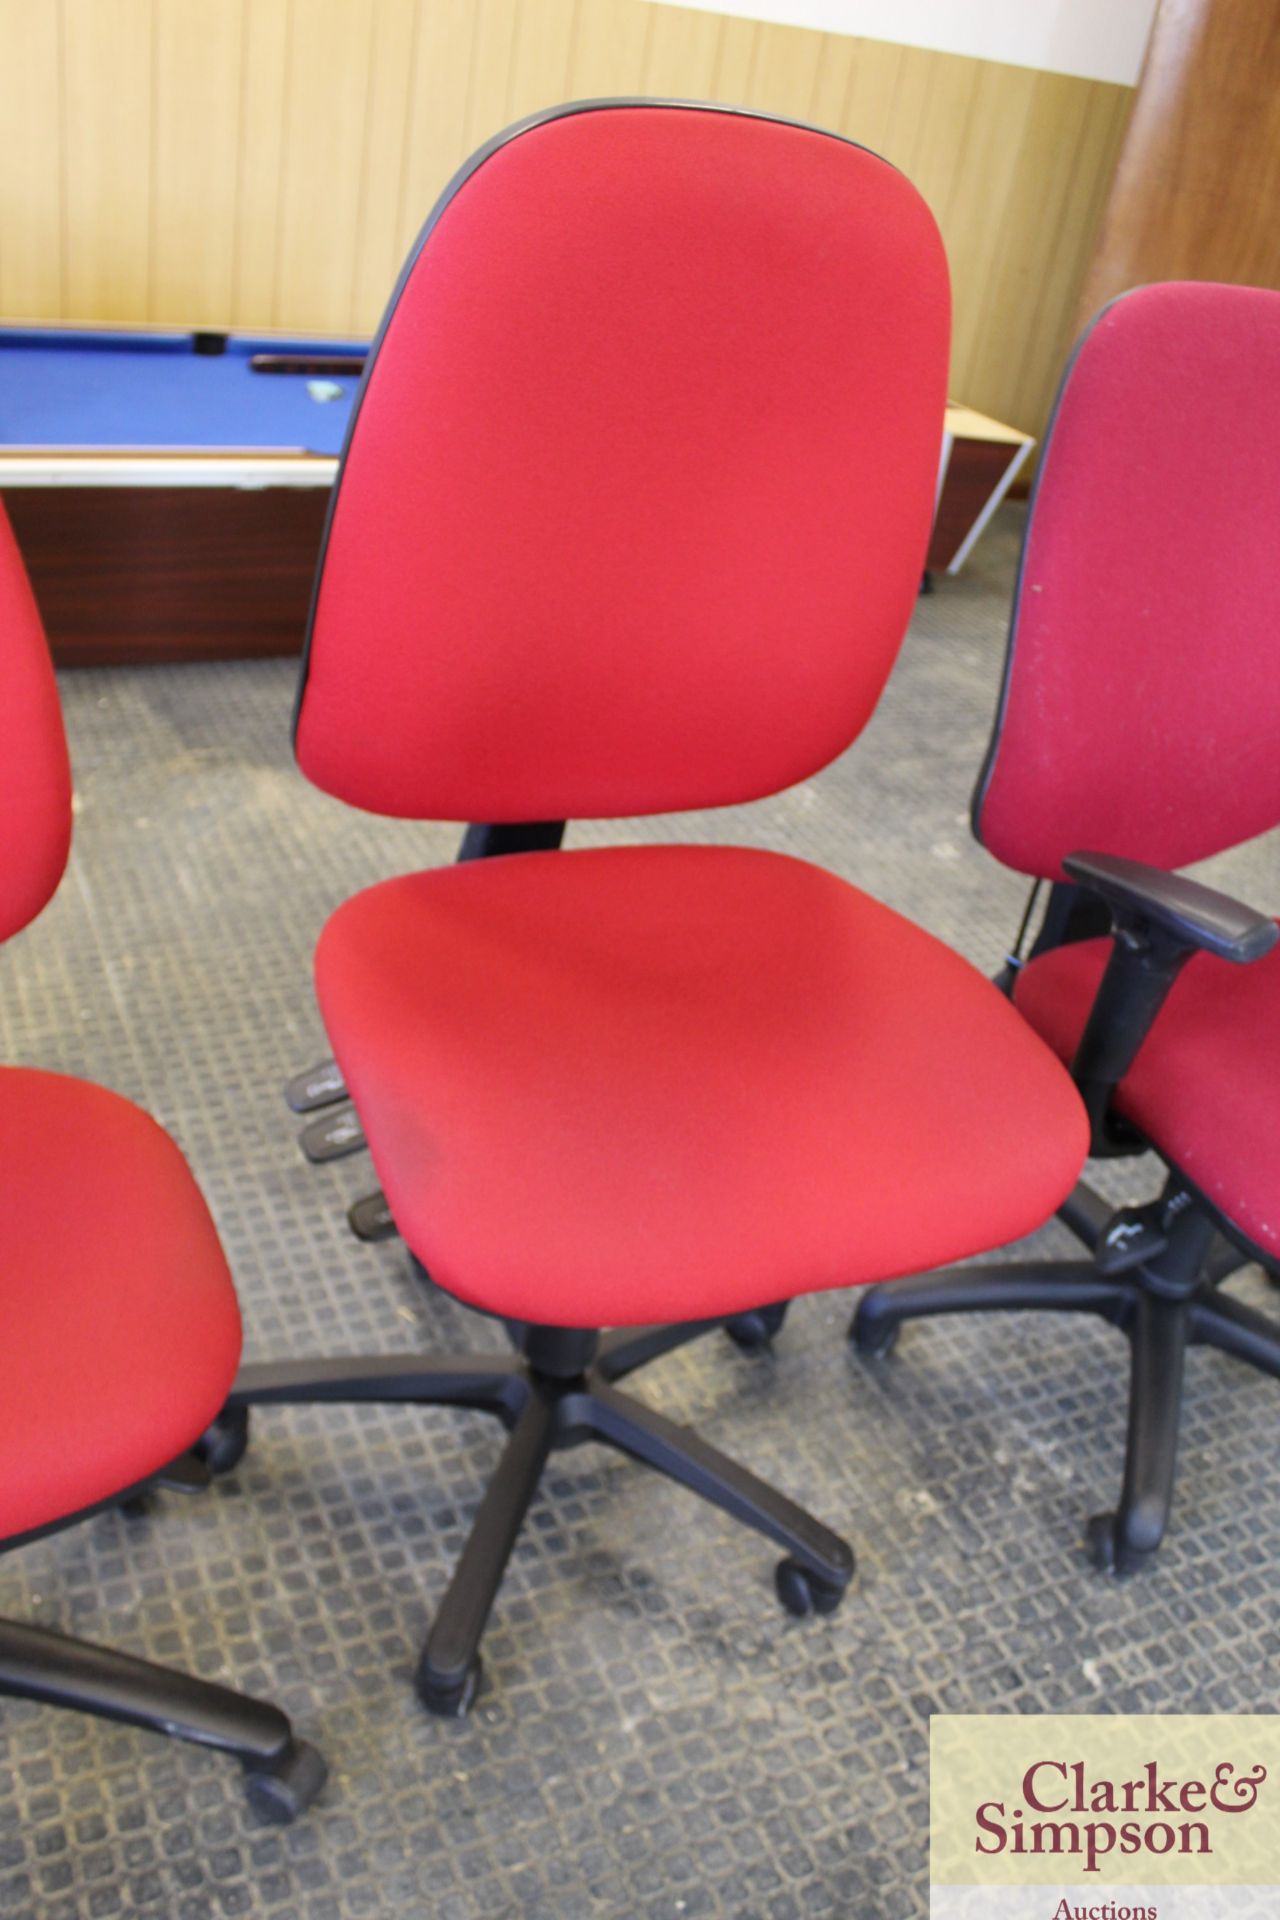 5x office chairs. - Image 5 of 6